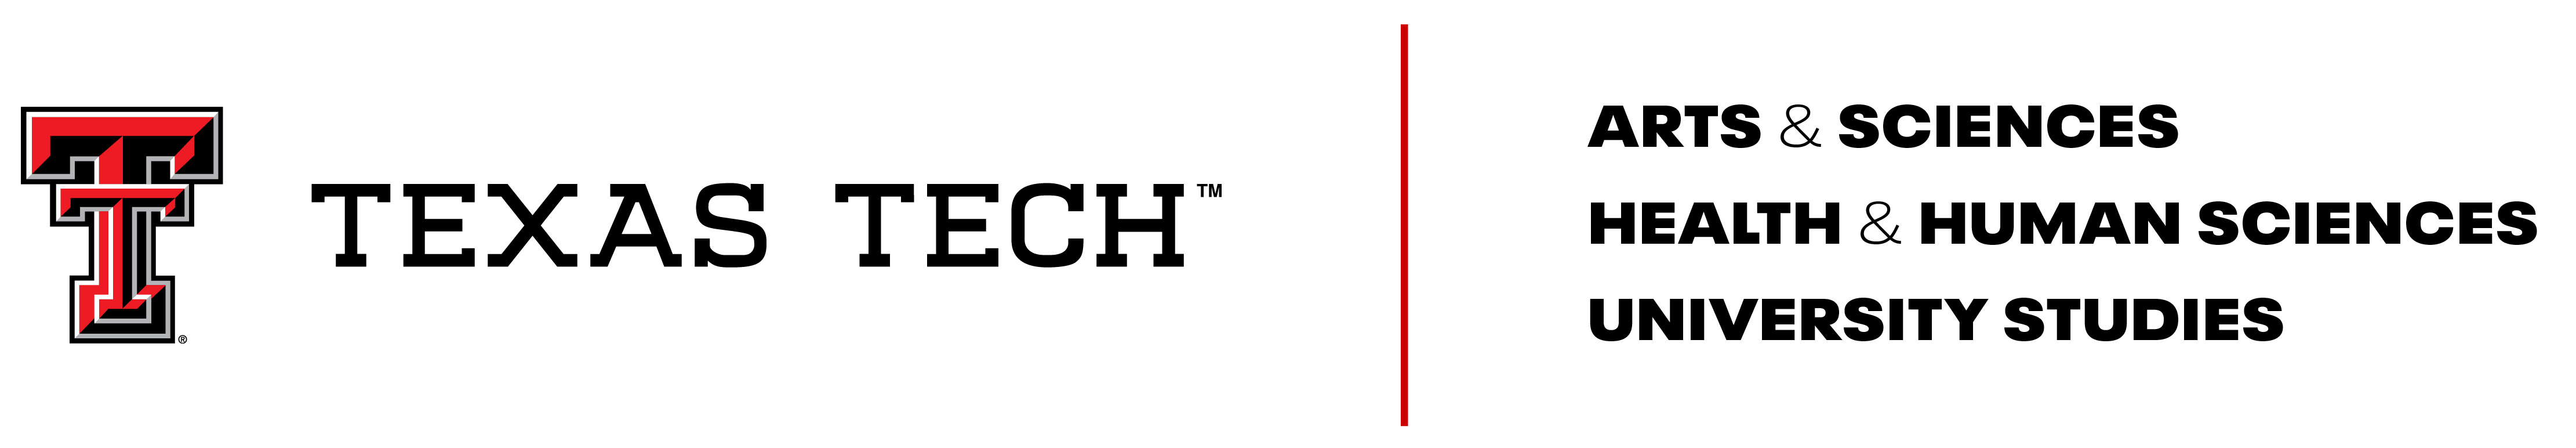 The Texas Tech wordmark is on the left. A red line creates a separation.           To the right of the line, there are three unit names stacked vertically.